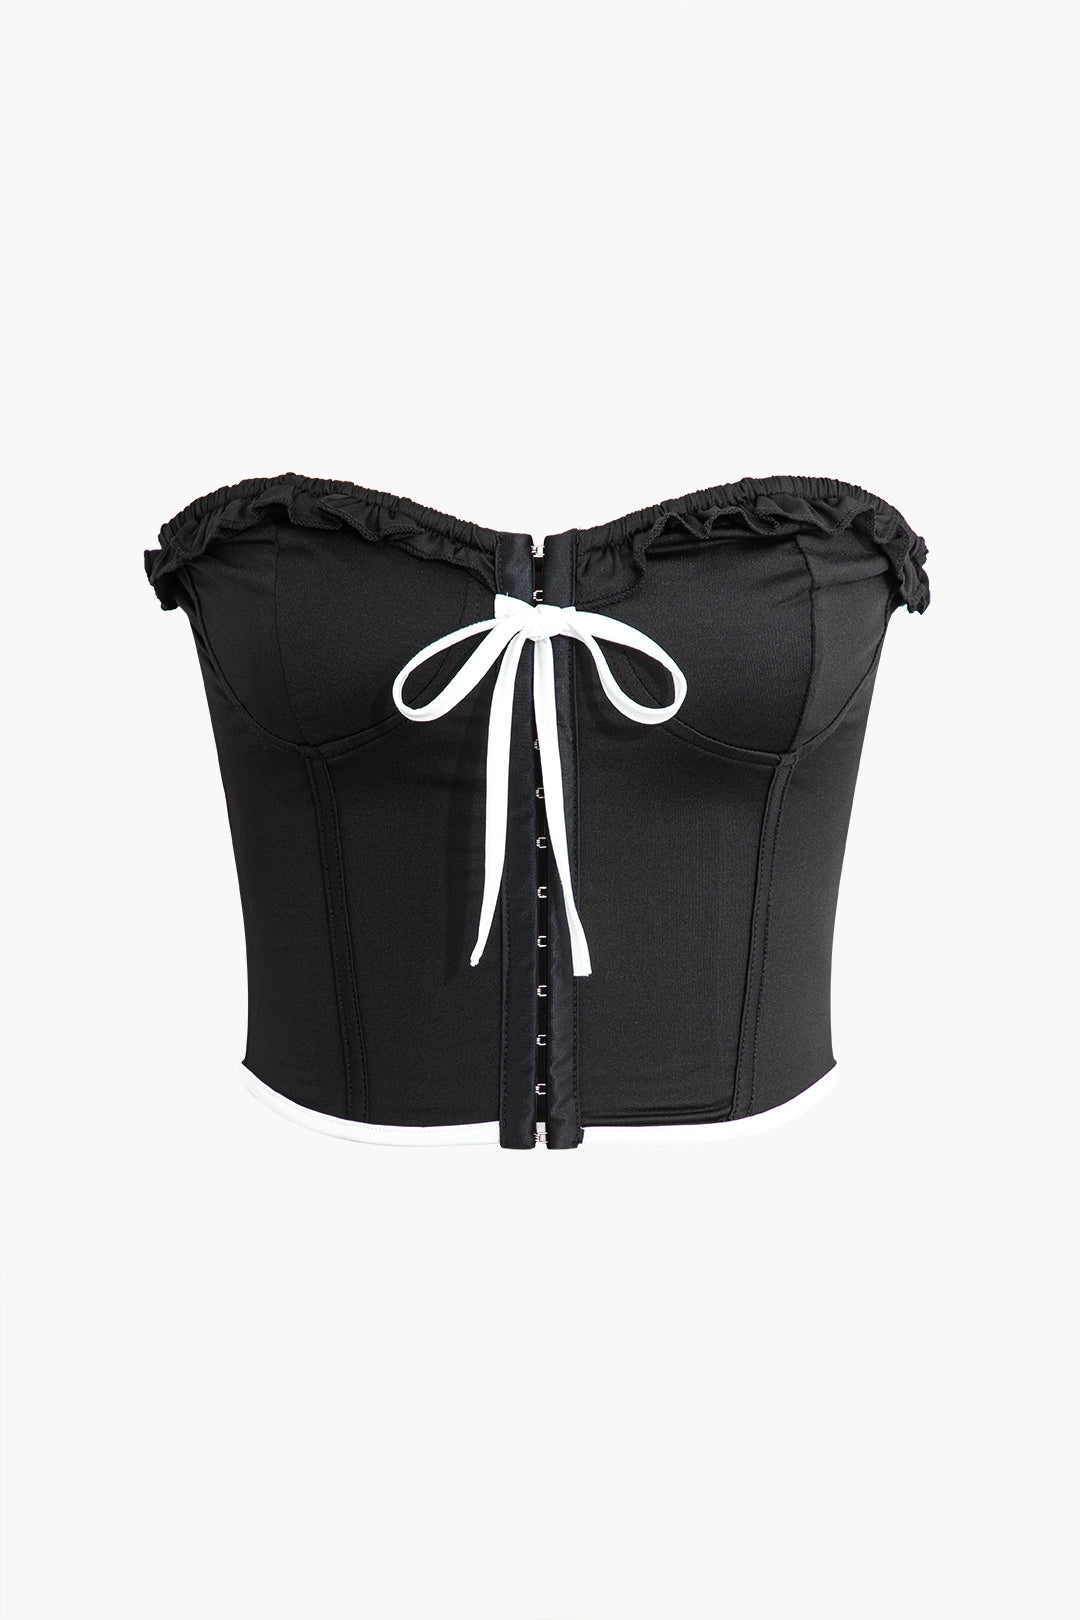 Lace Up Ruffle Bustier Corset Top – Micas